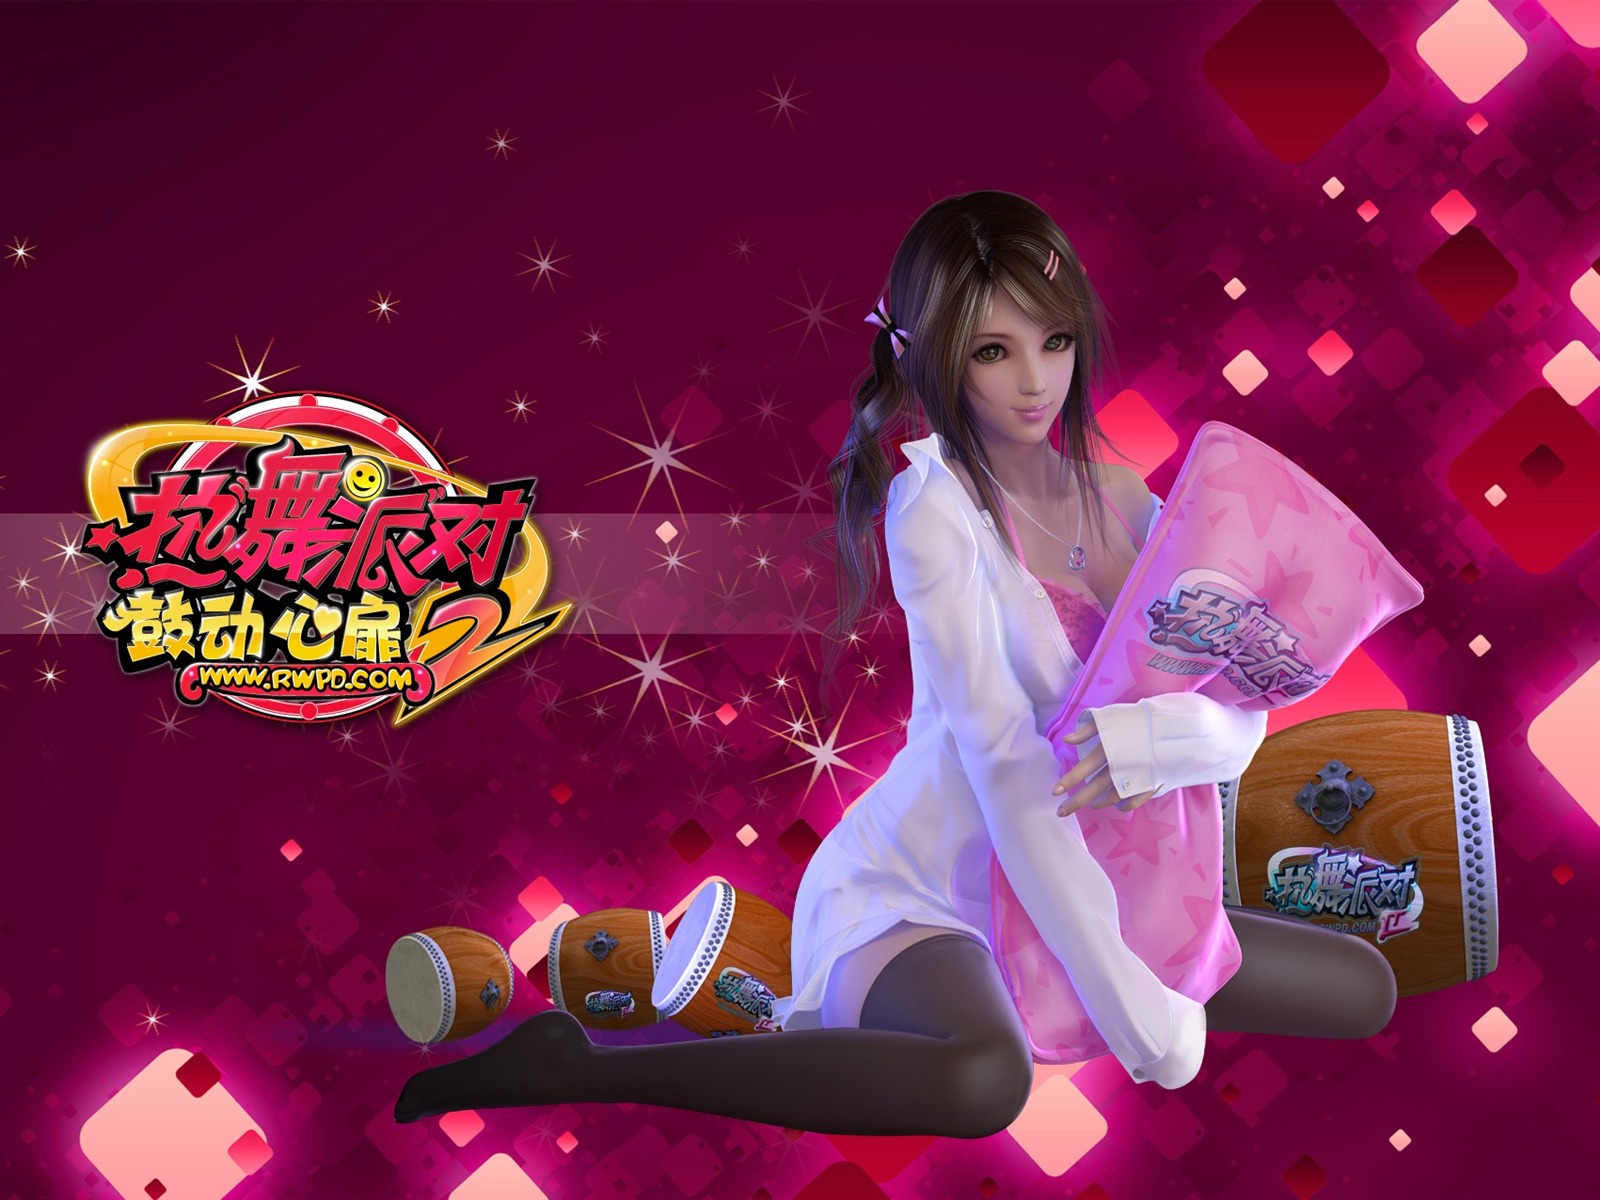 Online game Hot Dance Party II official wallpapers #11 - 1600x1200